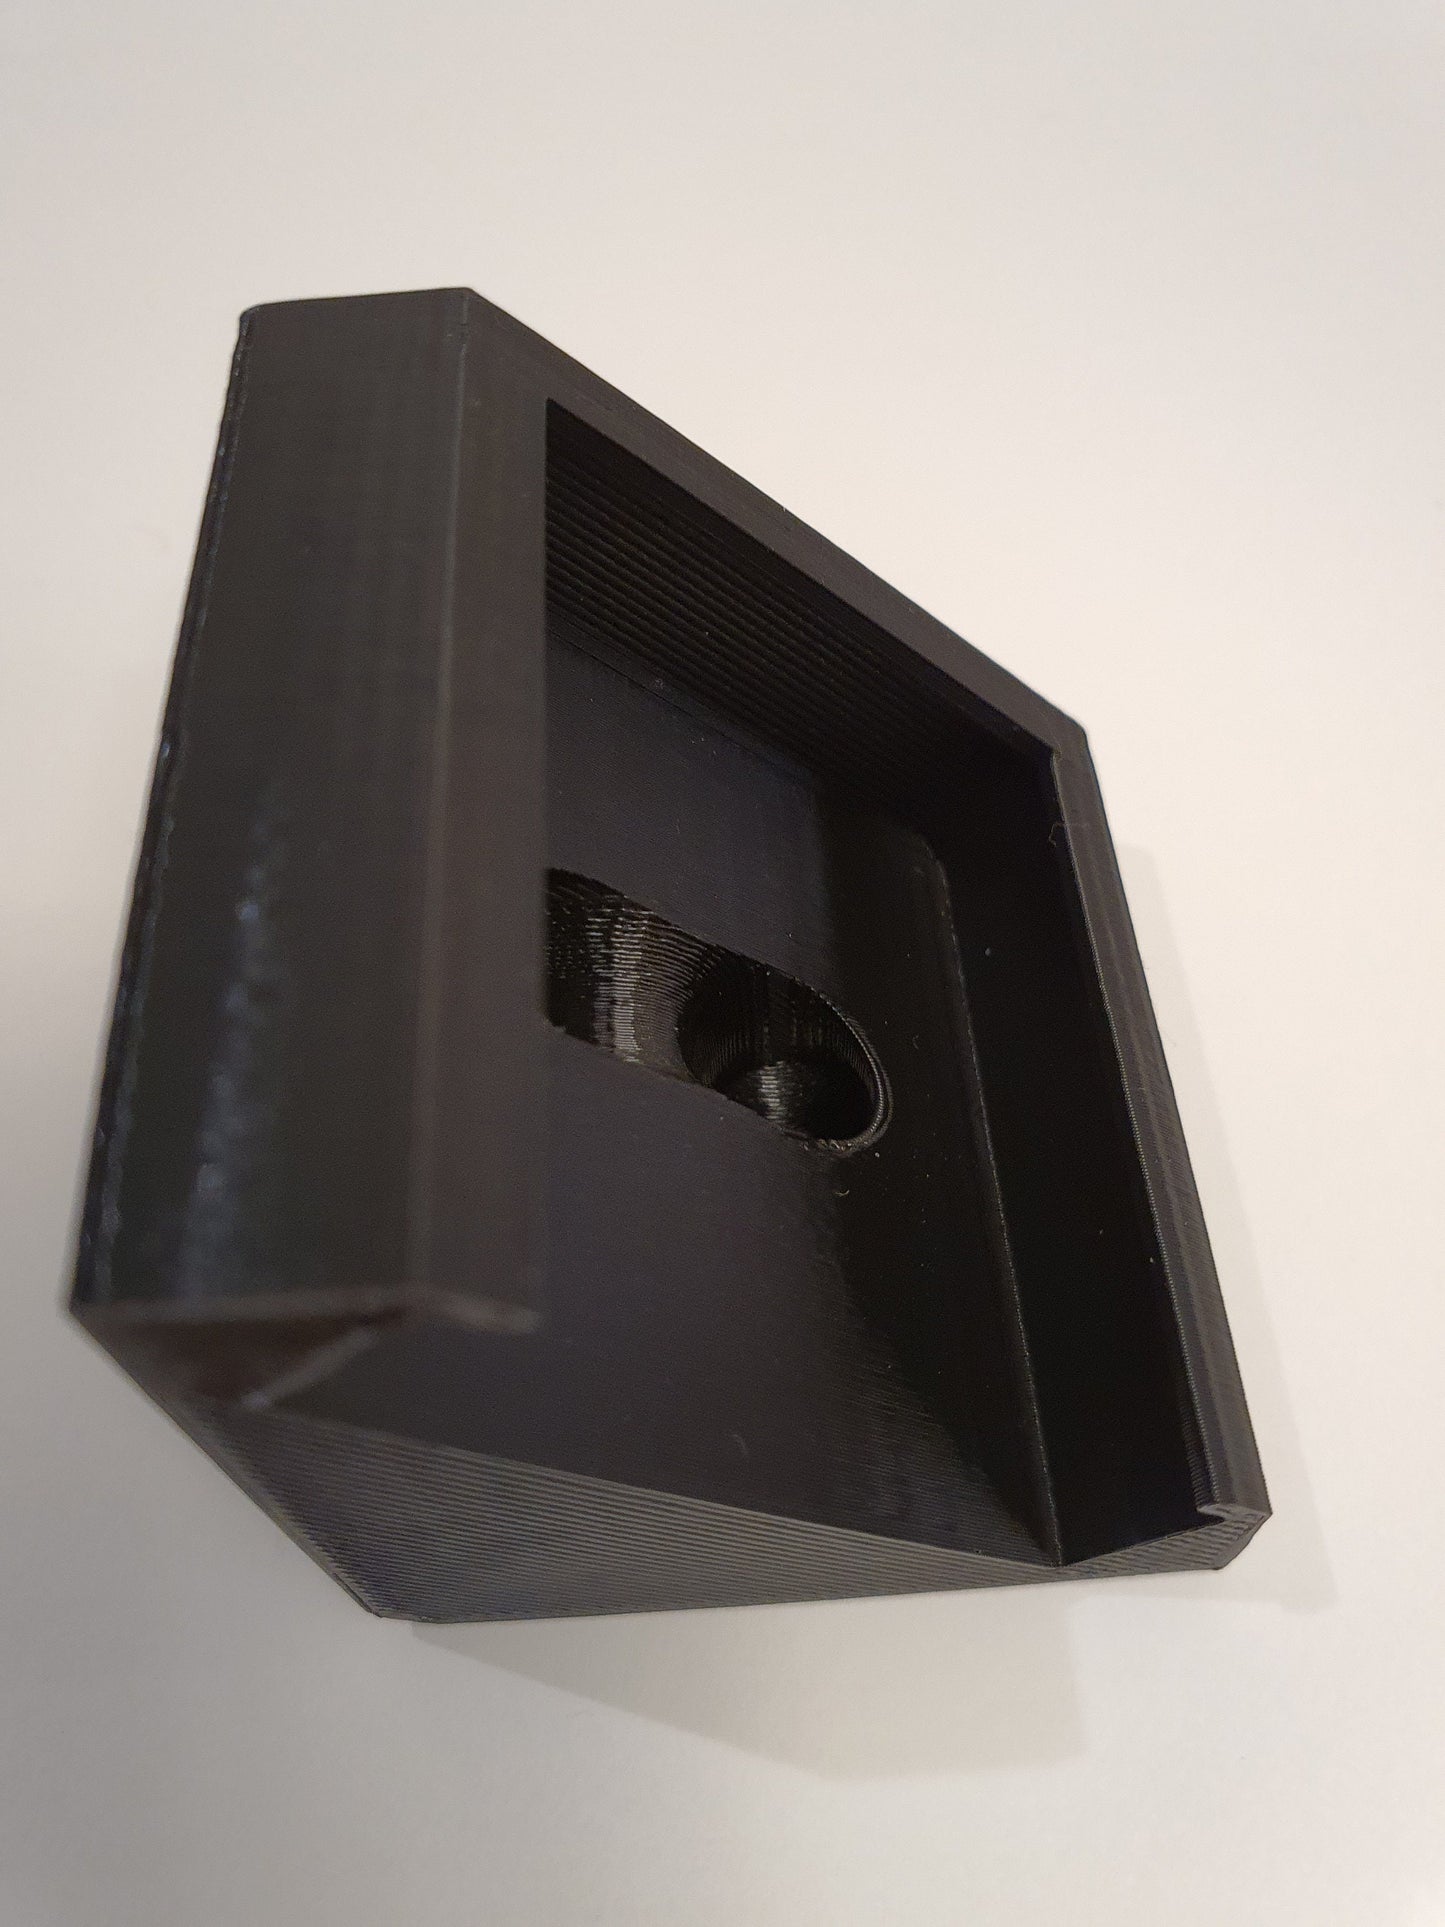 Wyze Cam Mount, 45 Degree Corner For V2. Get The Perfect Viewing Angle With Wyze Cam Mount For Corners